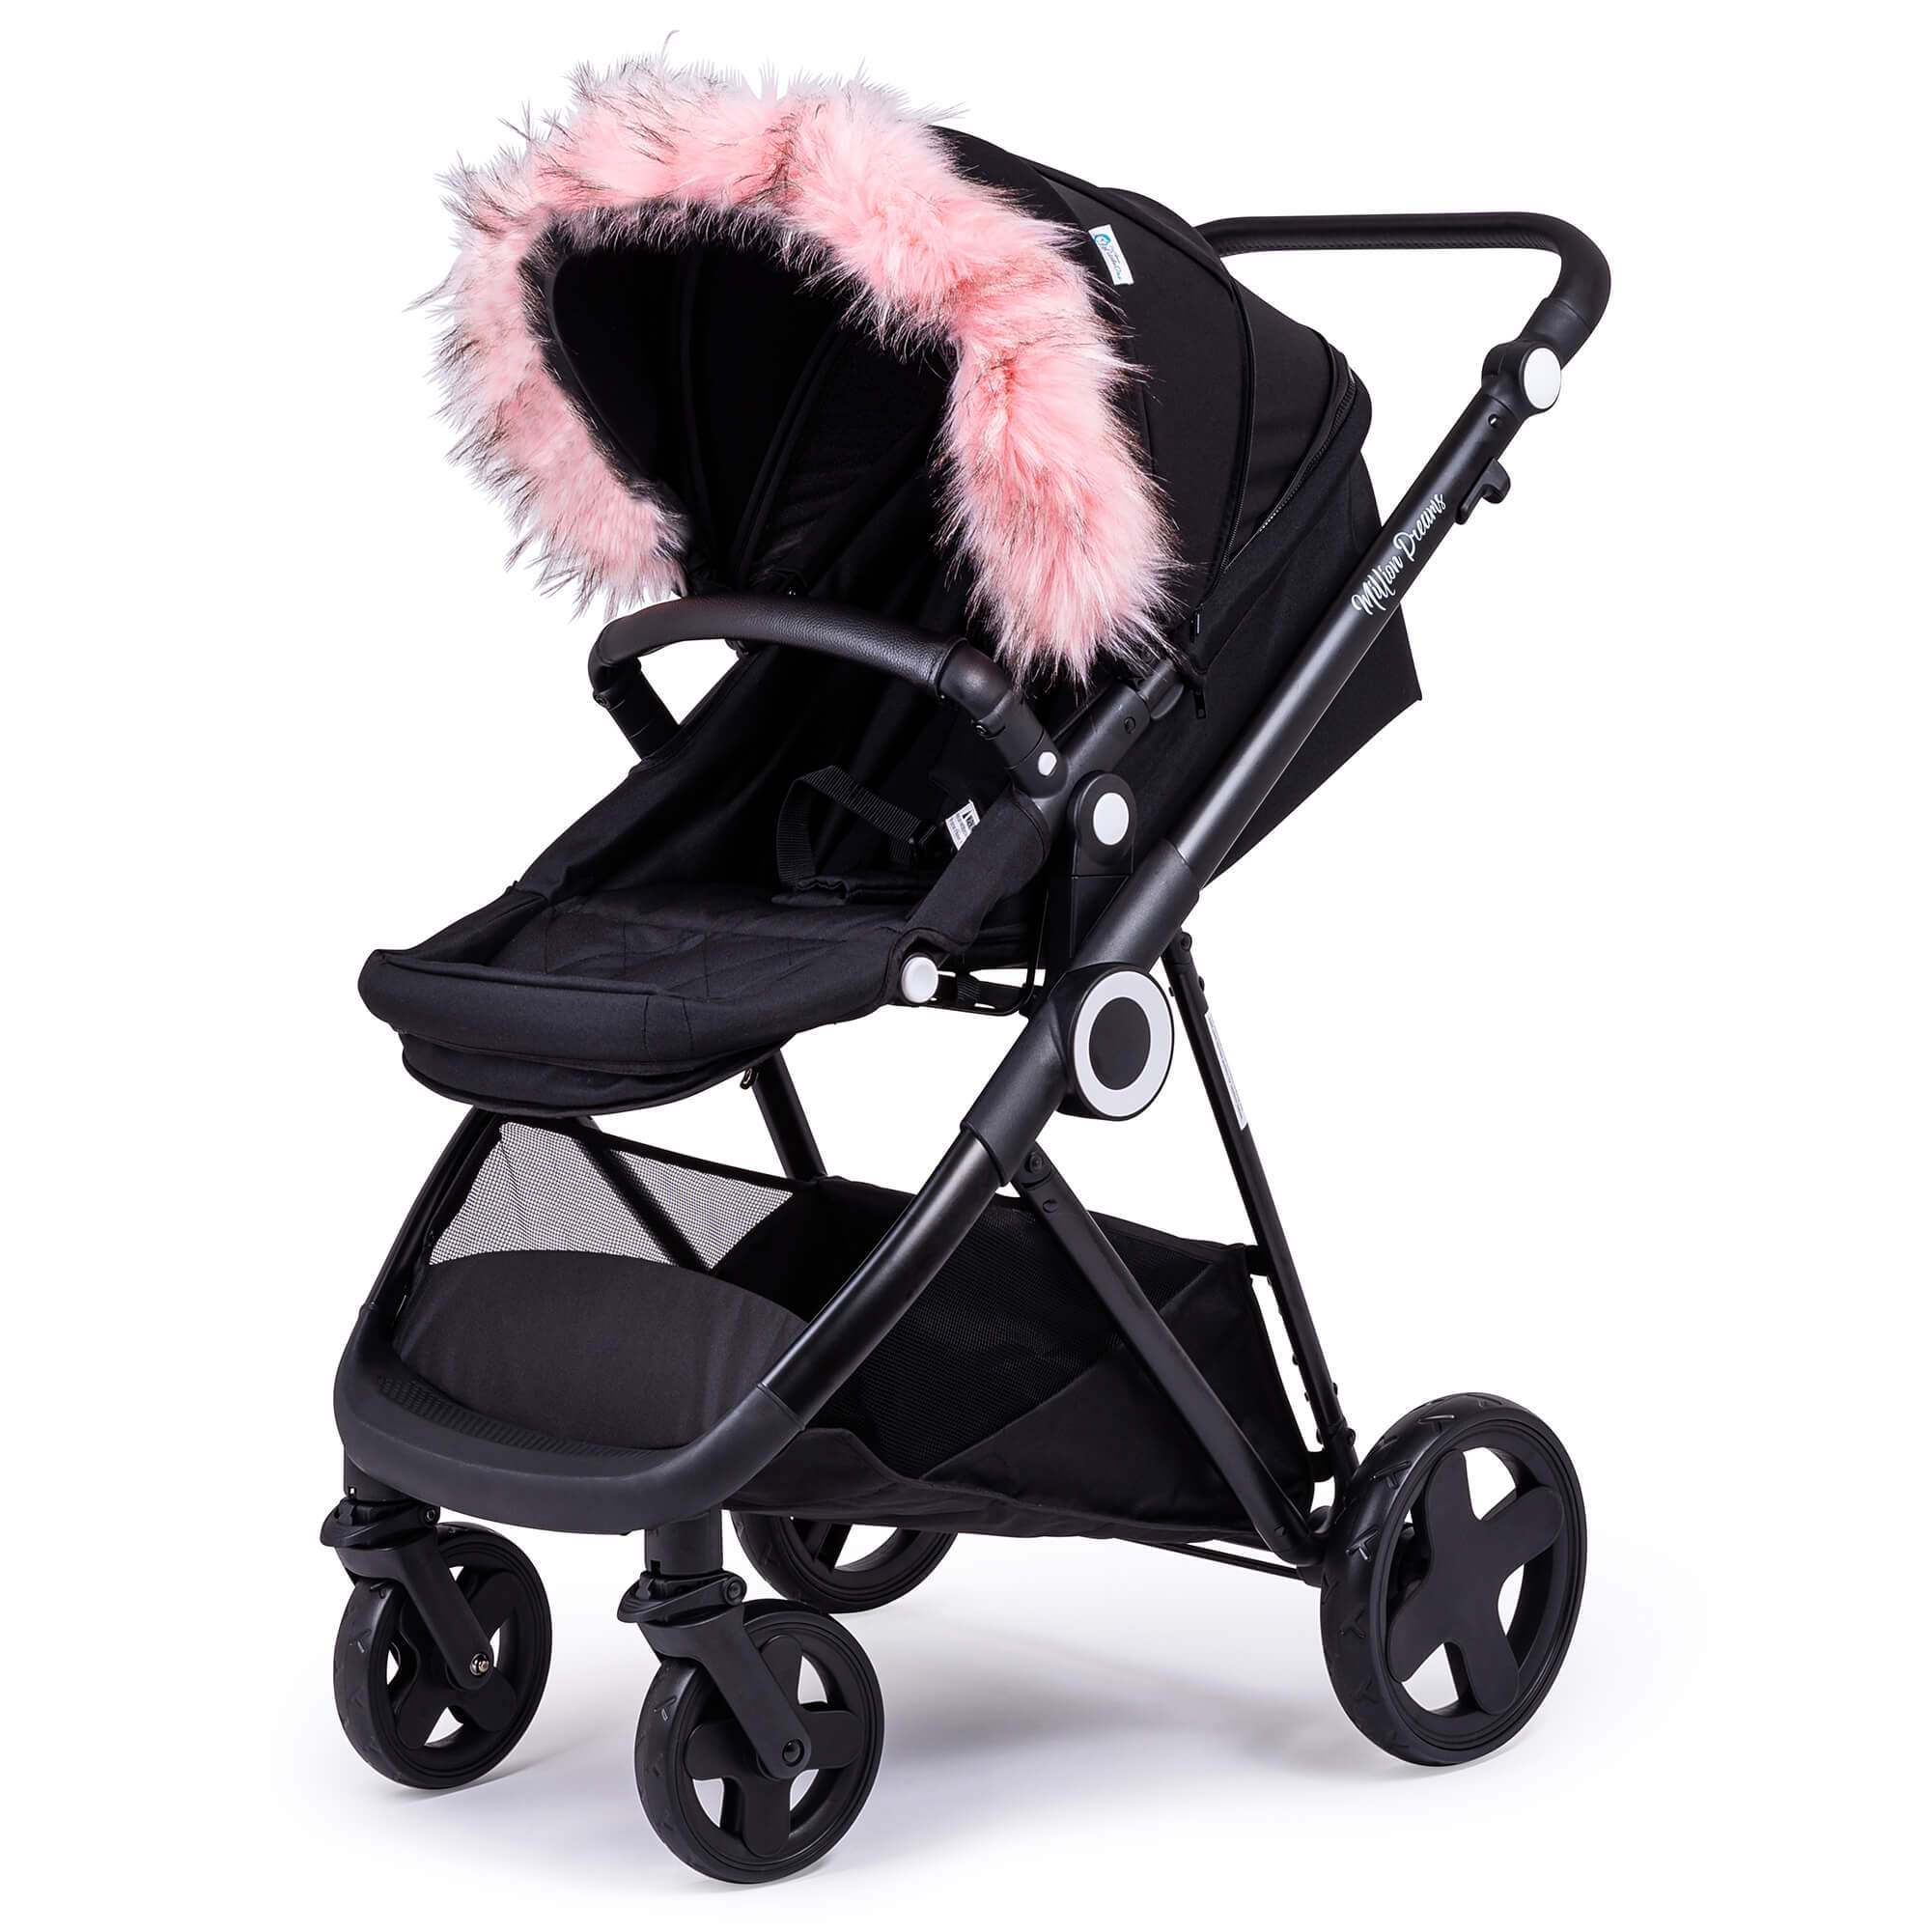 Pram Fur Hood Trim Attachment for Pushchair Compatible with Firstwheels - Light Pink / Fits All Models | For Your Little One